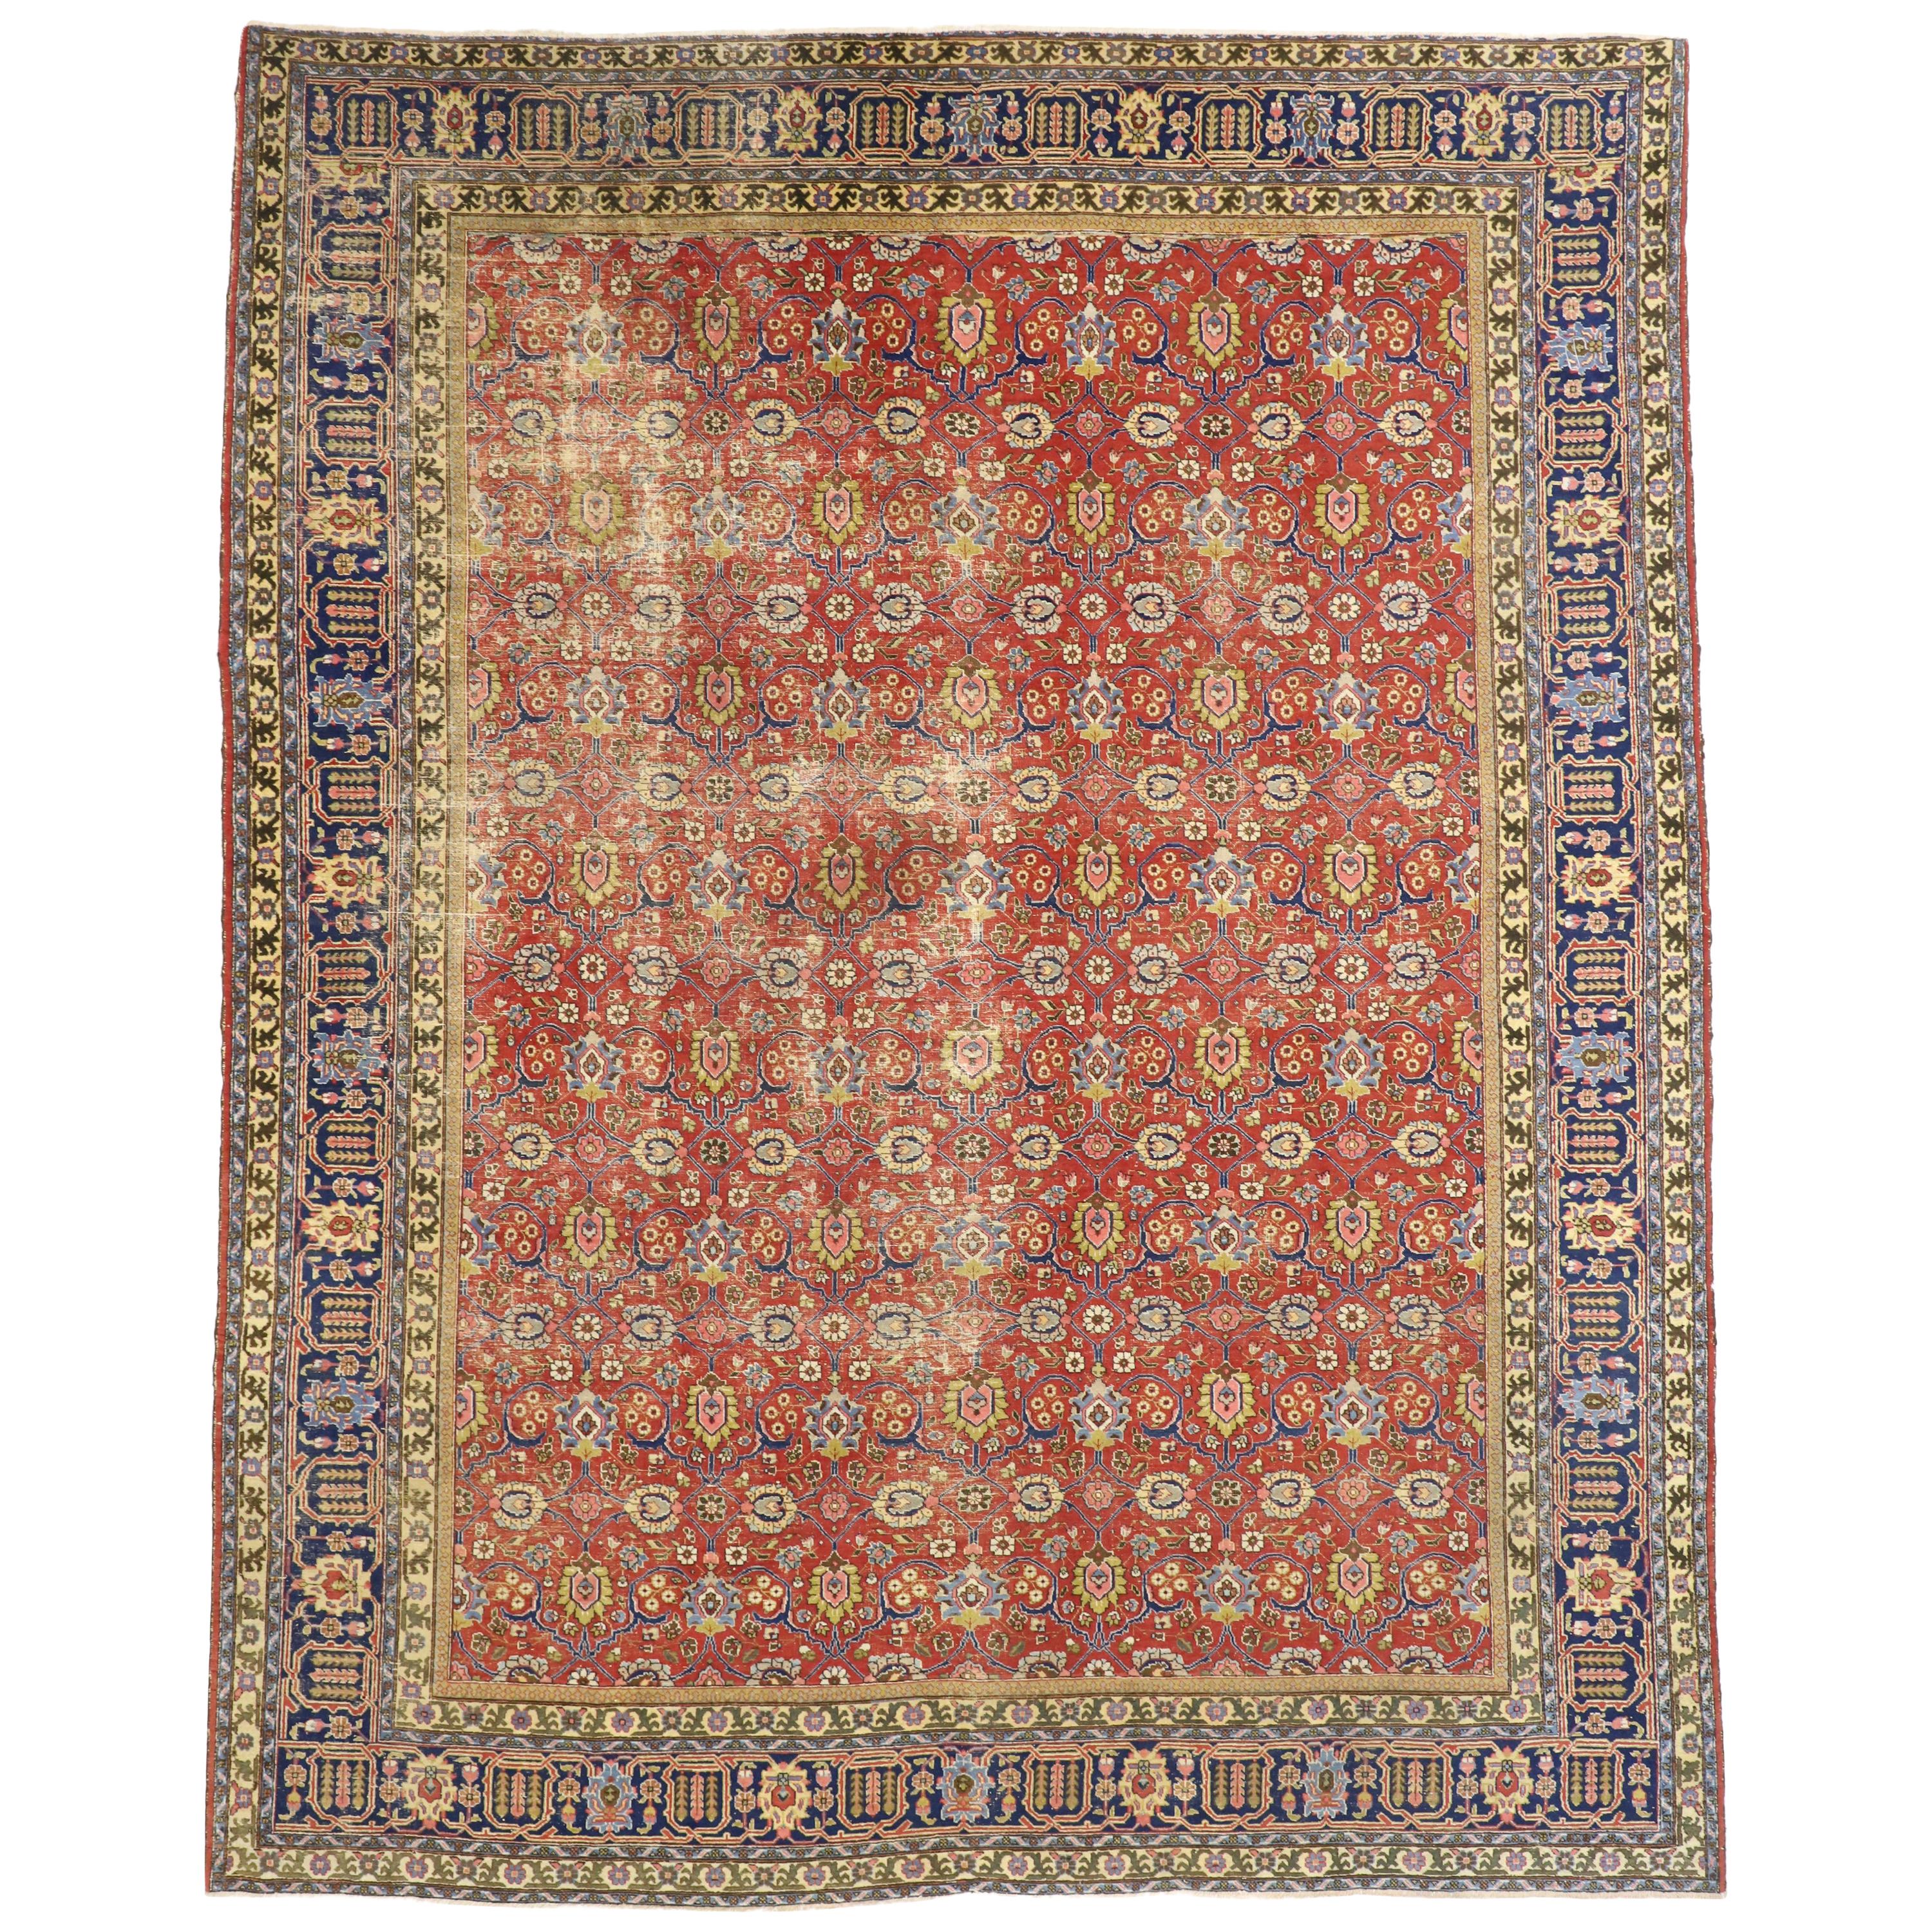 Distressed Vintage Persian Tabriz Area Rug with Relaxed Federal Style